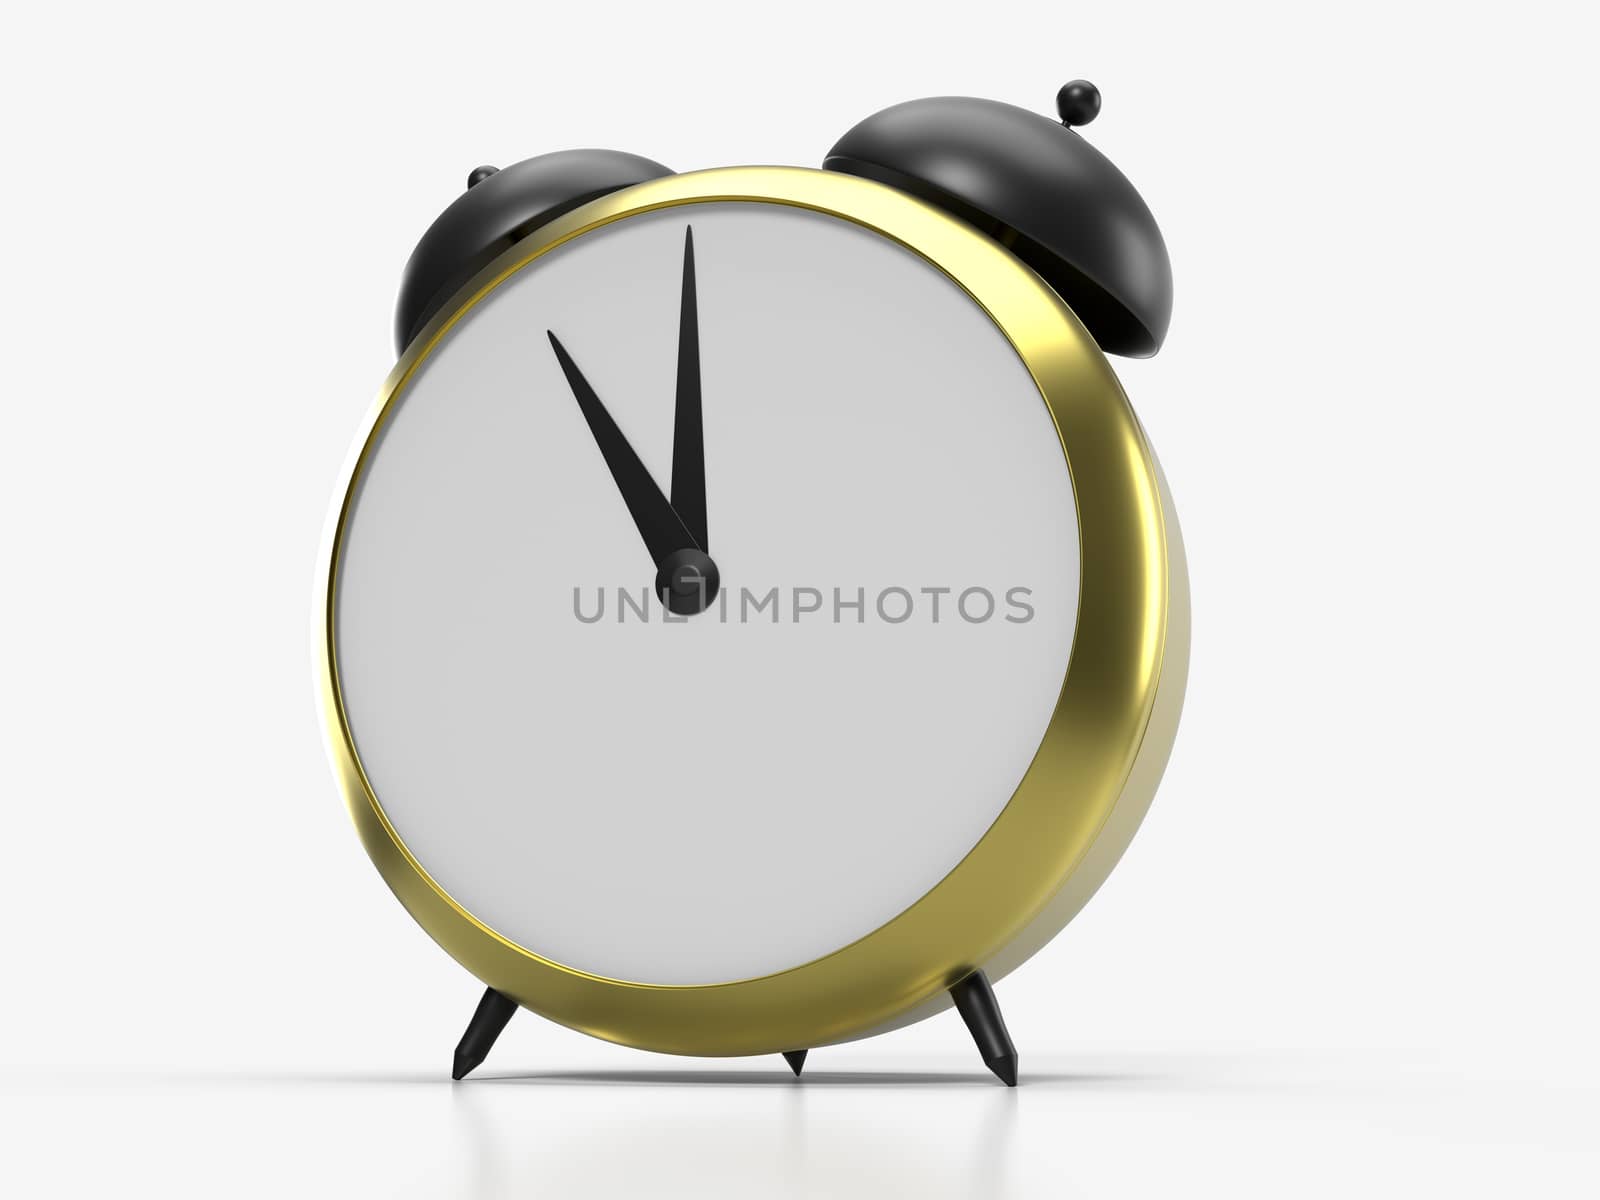 Alarm clock on white background. 11 O'Clock, am or pm. 3D render by Nobilior